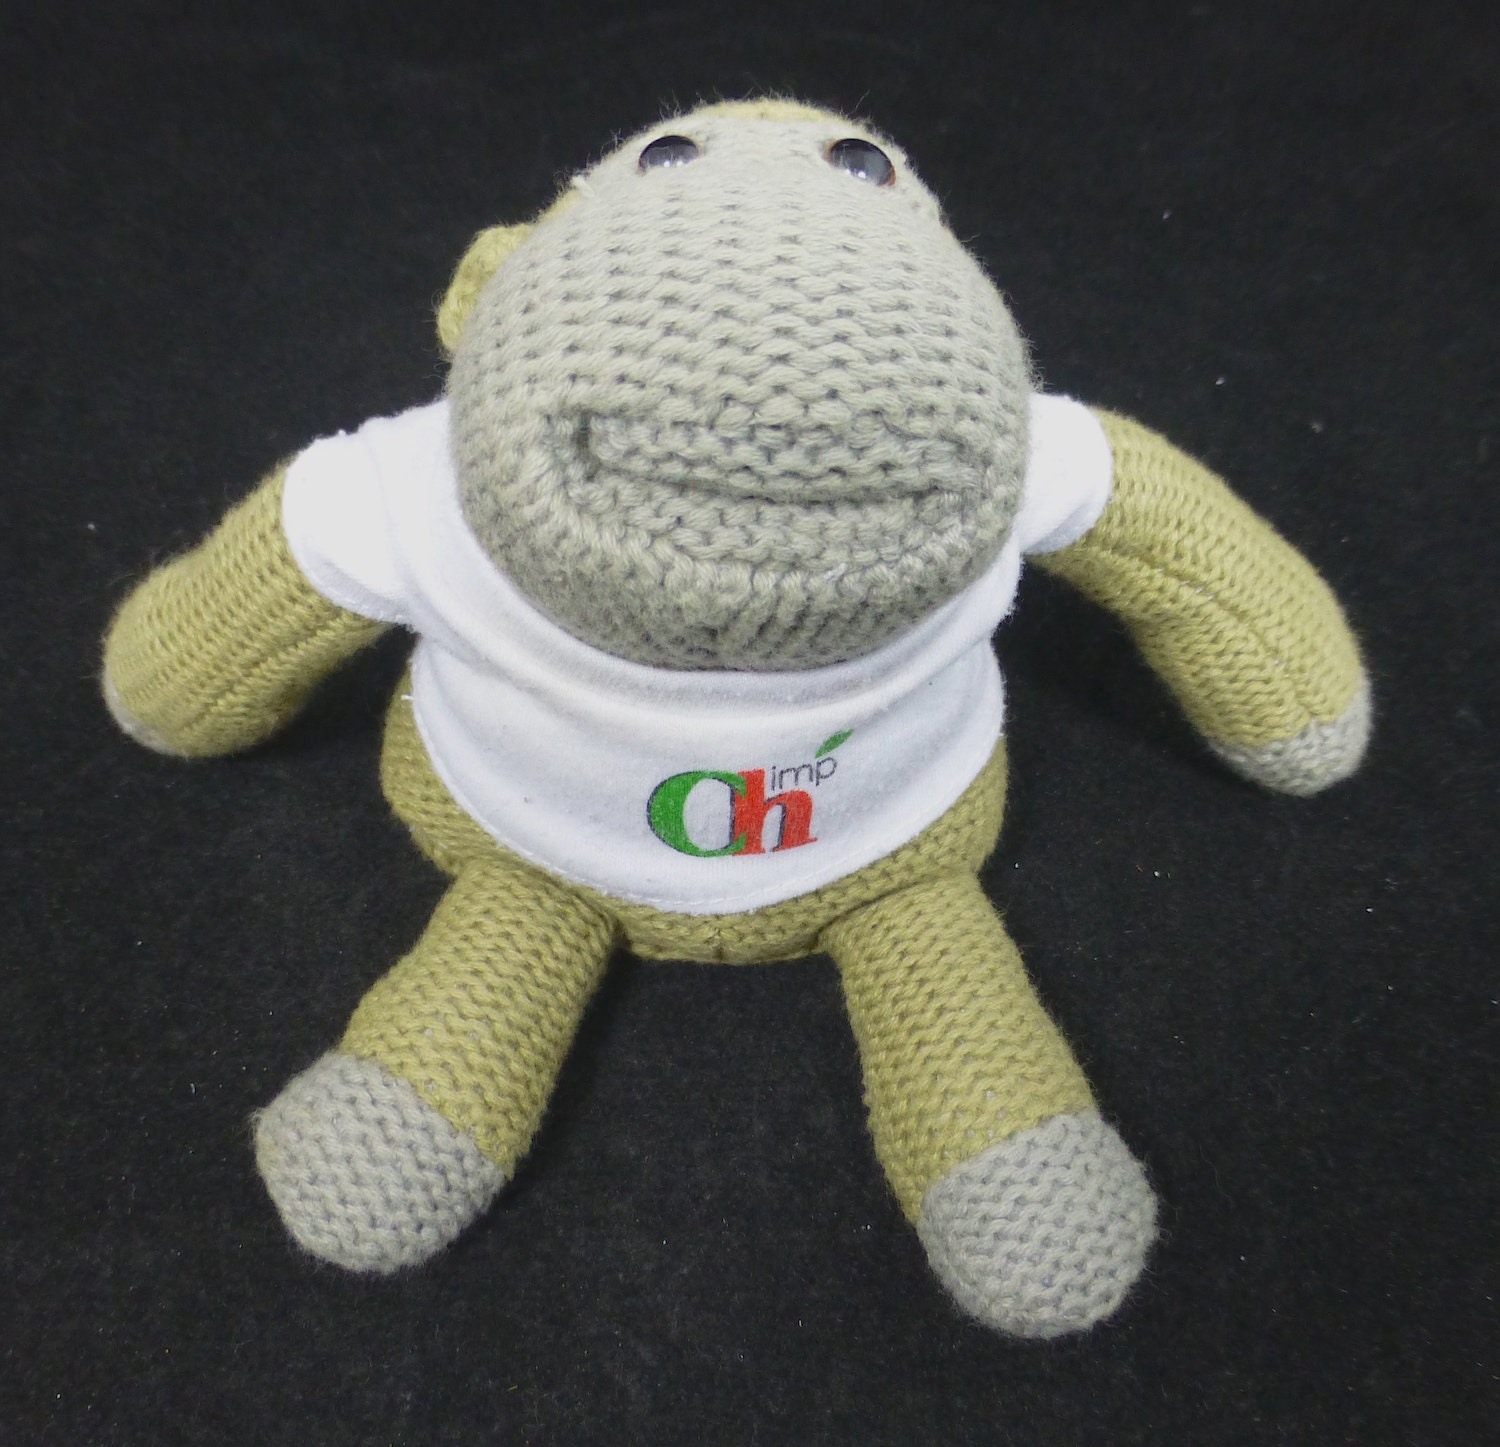 PASTEL COLOUR HAND KNITTED PG TIPS MONKEY/CHIMP CHUNKY JUMPER AND BOOTS.